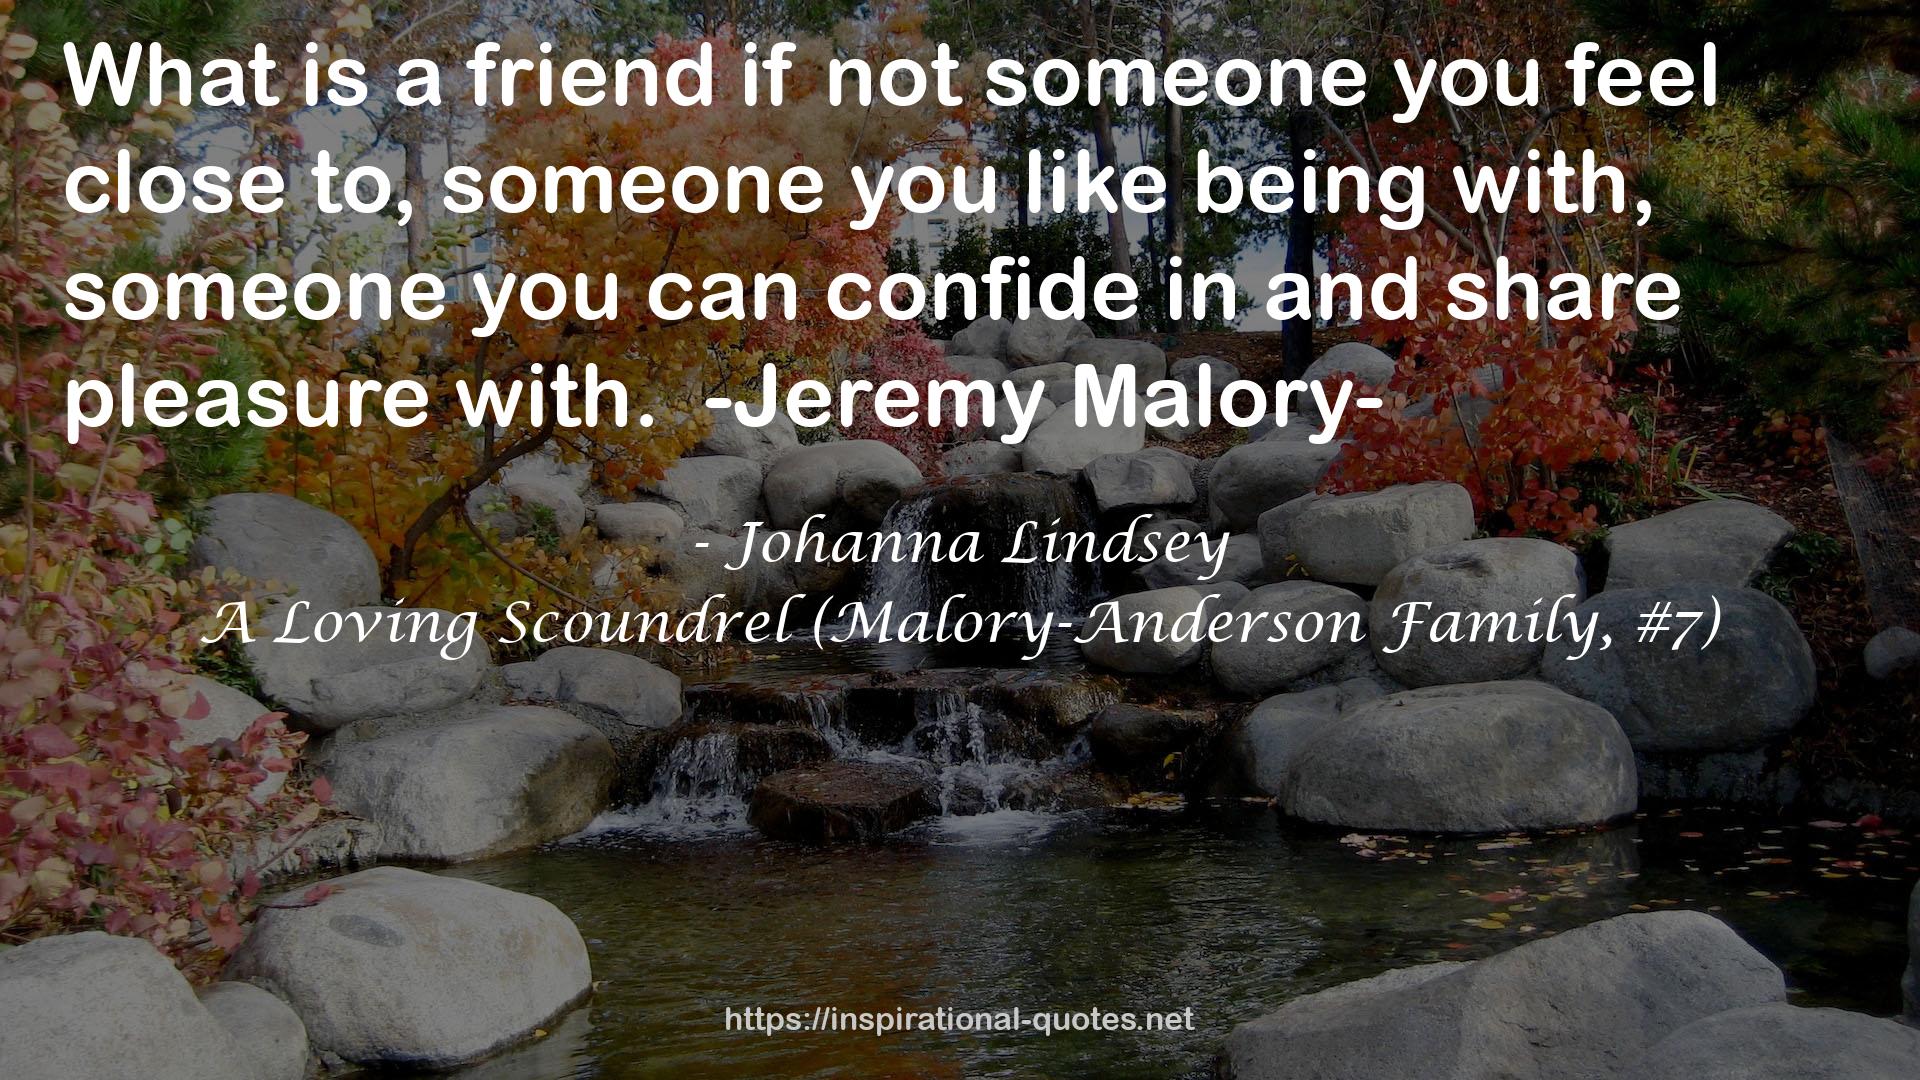 A Loving Scoundrel (Malory-Anderson Family, #7) QUOTES